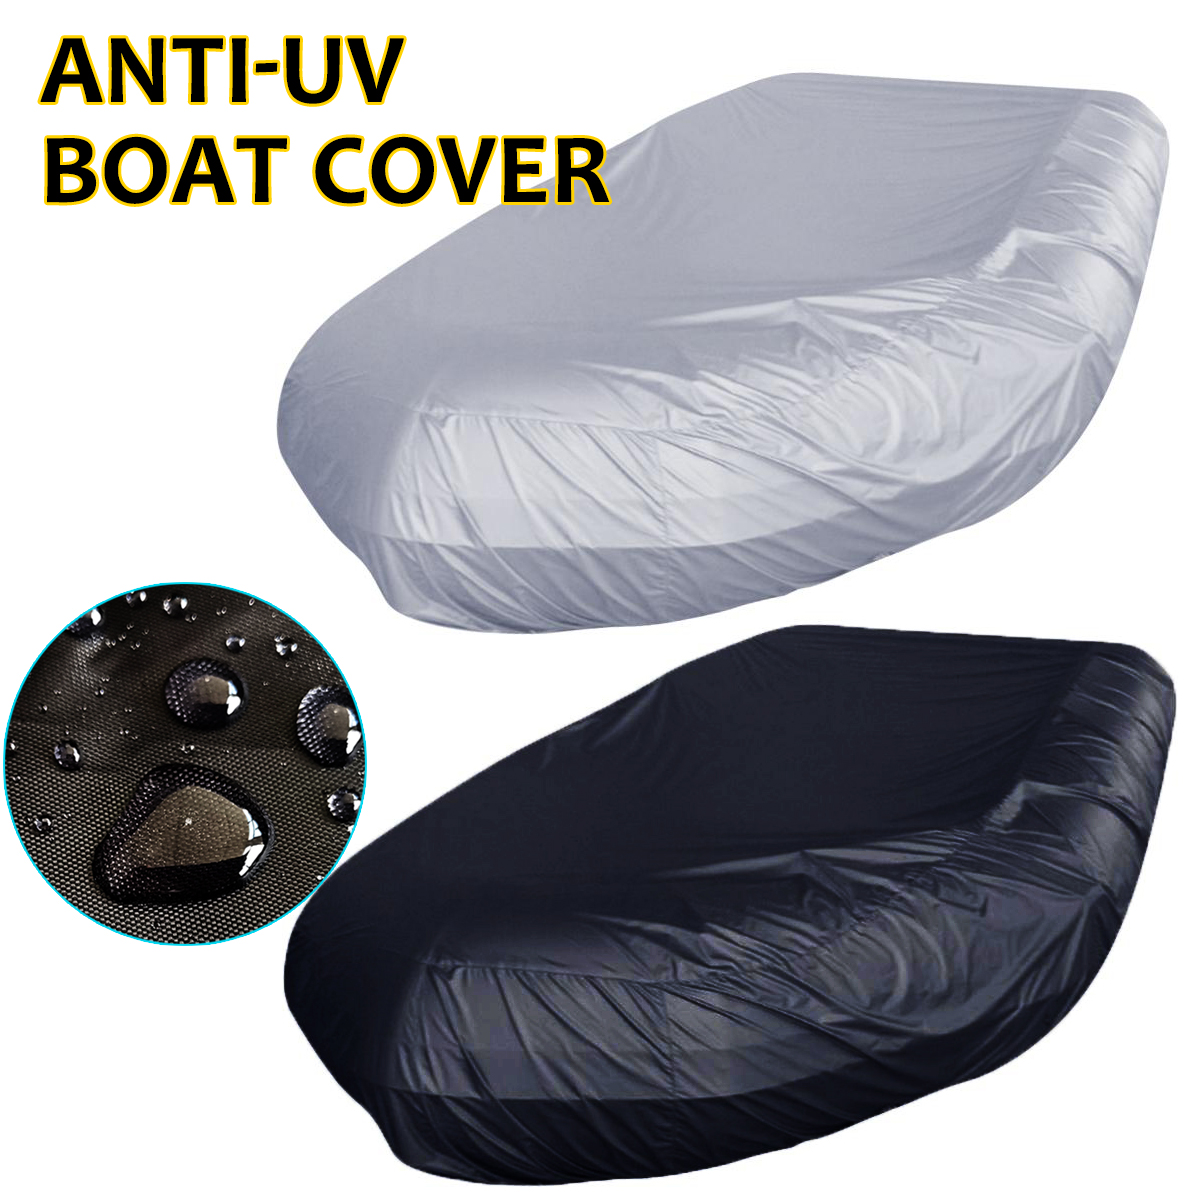 Flameer Heavy Duty Water UV Protection Inflatable Boat/Dinghy/Tender Cover Storage Accessories